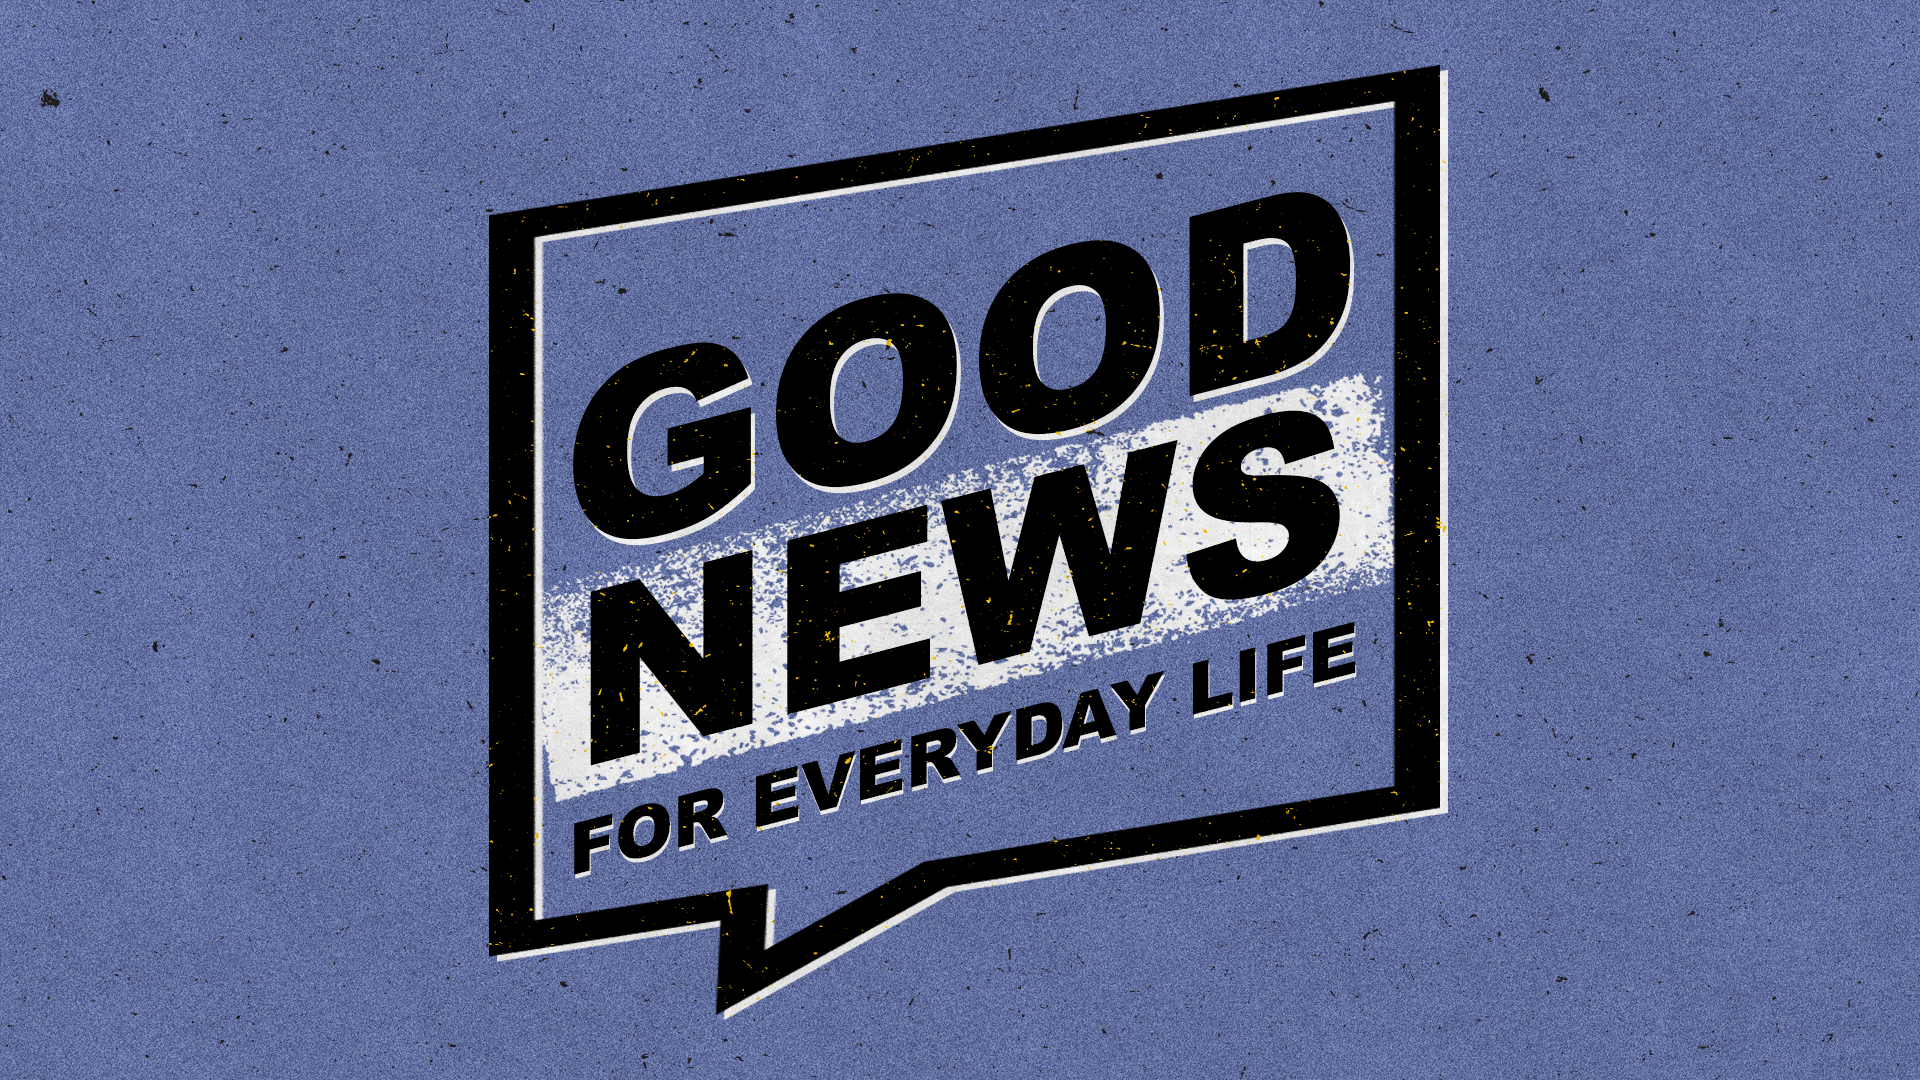 Good News For Every Day Life banner